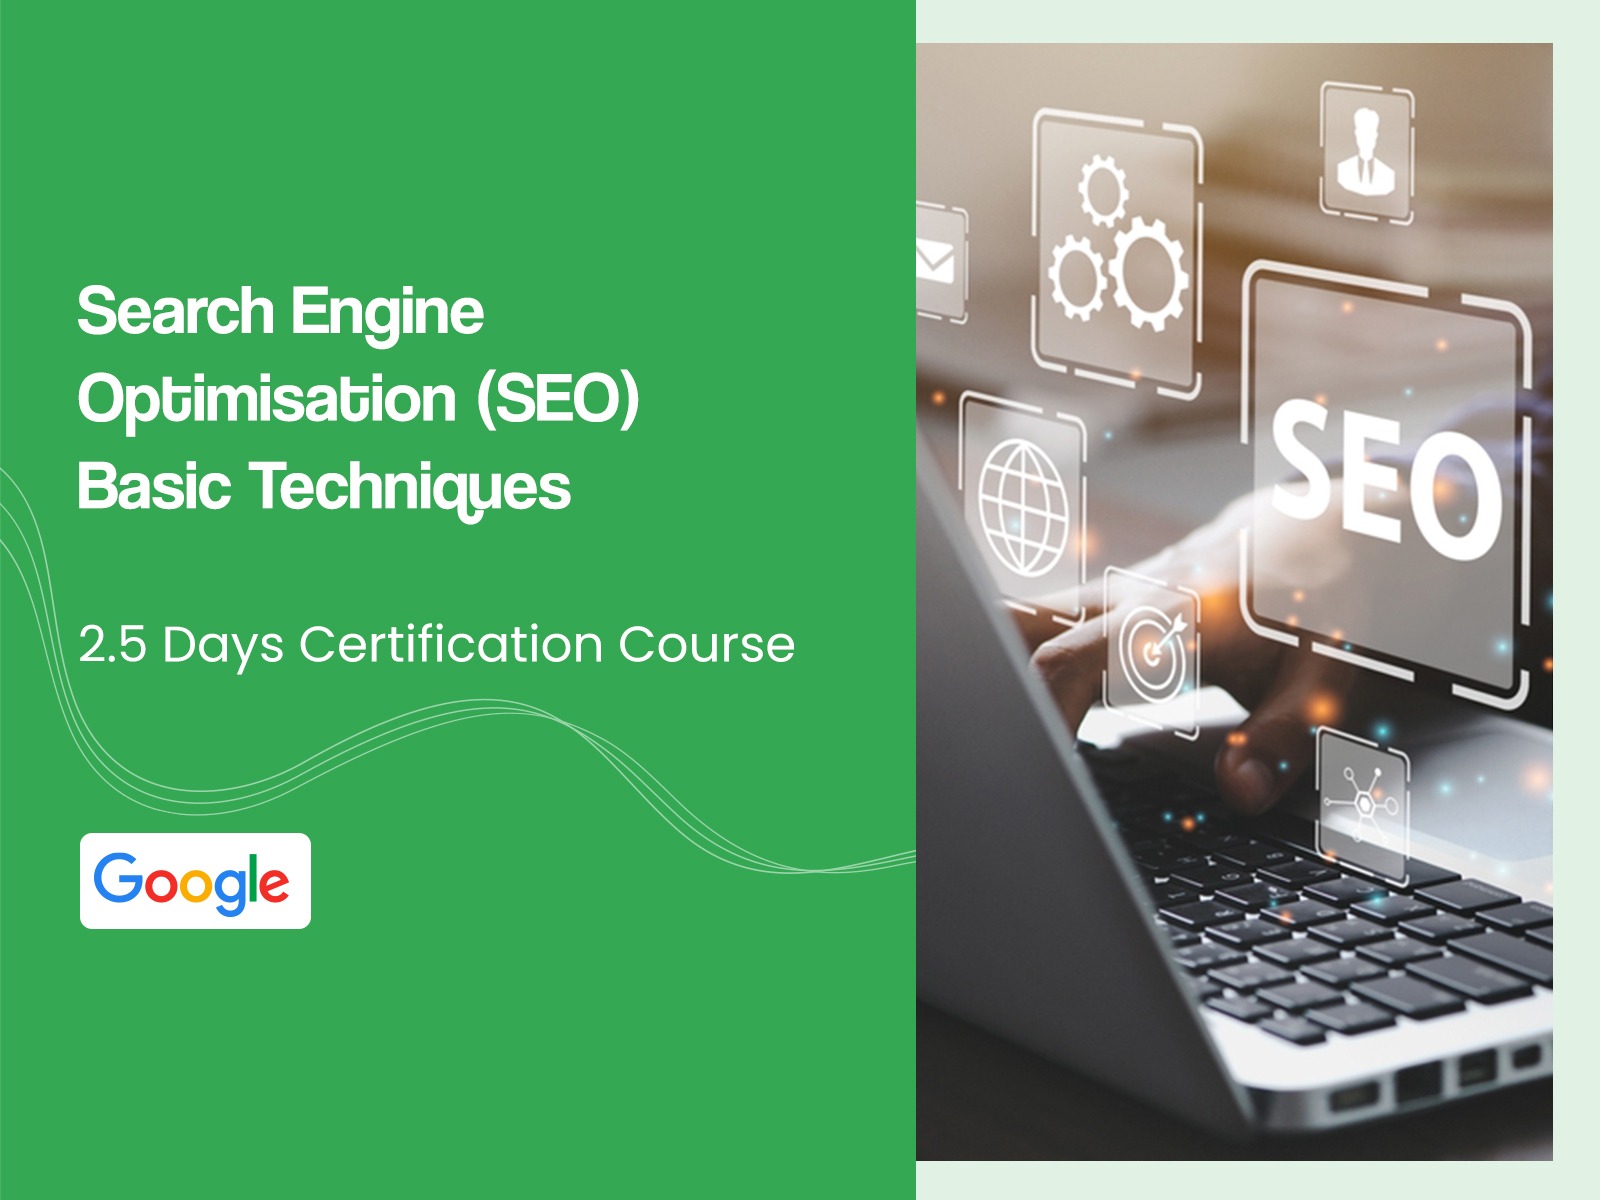 Search Engine Optimisation (SEO) Basic Techniques course in Singapore